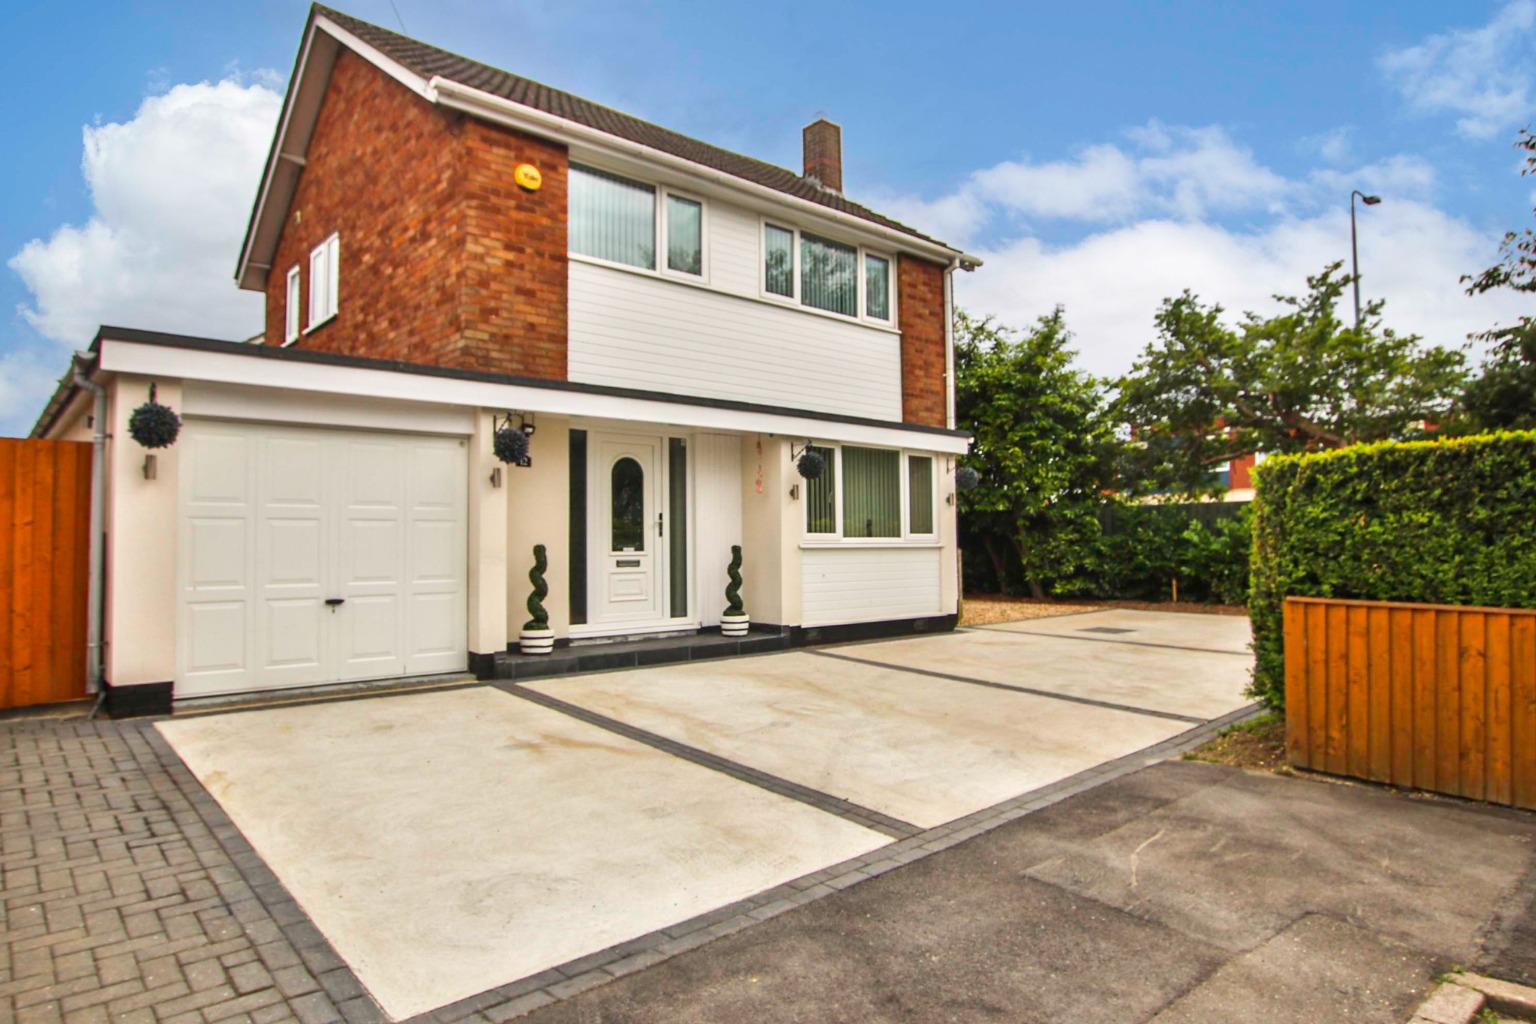 3 bed detached house for sale in Spinney Close, Immingham, DN40